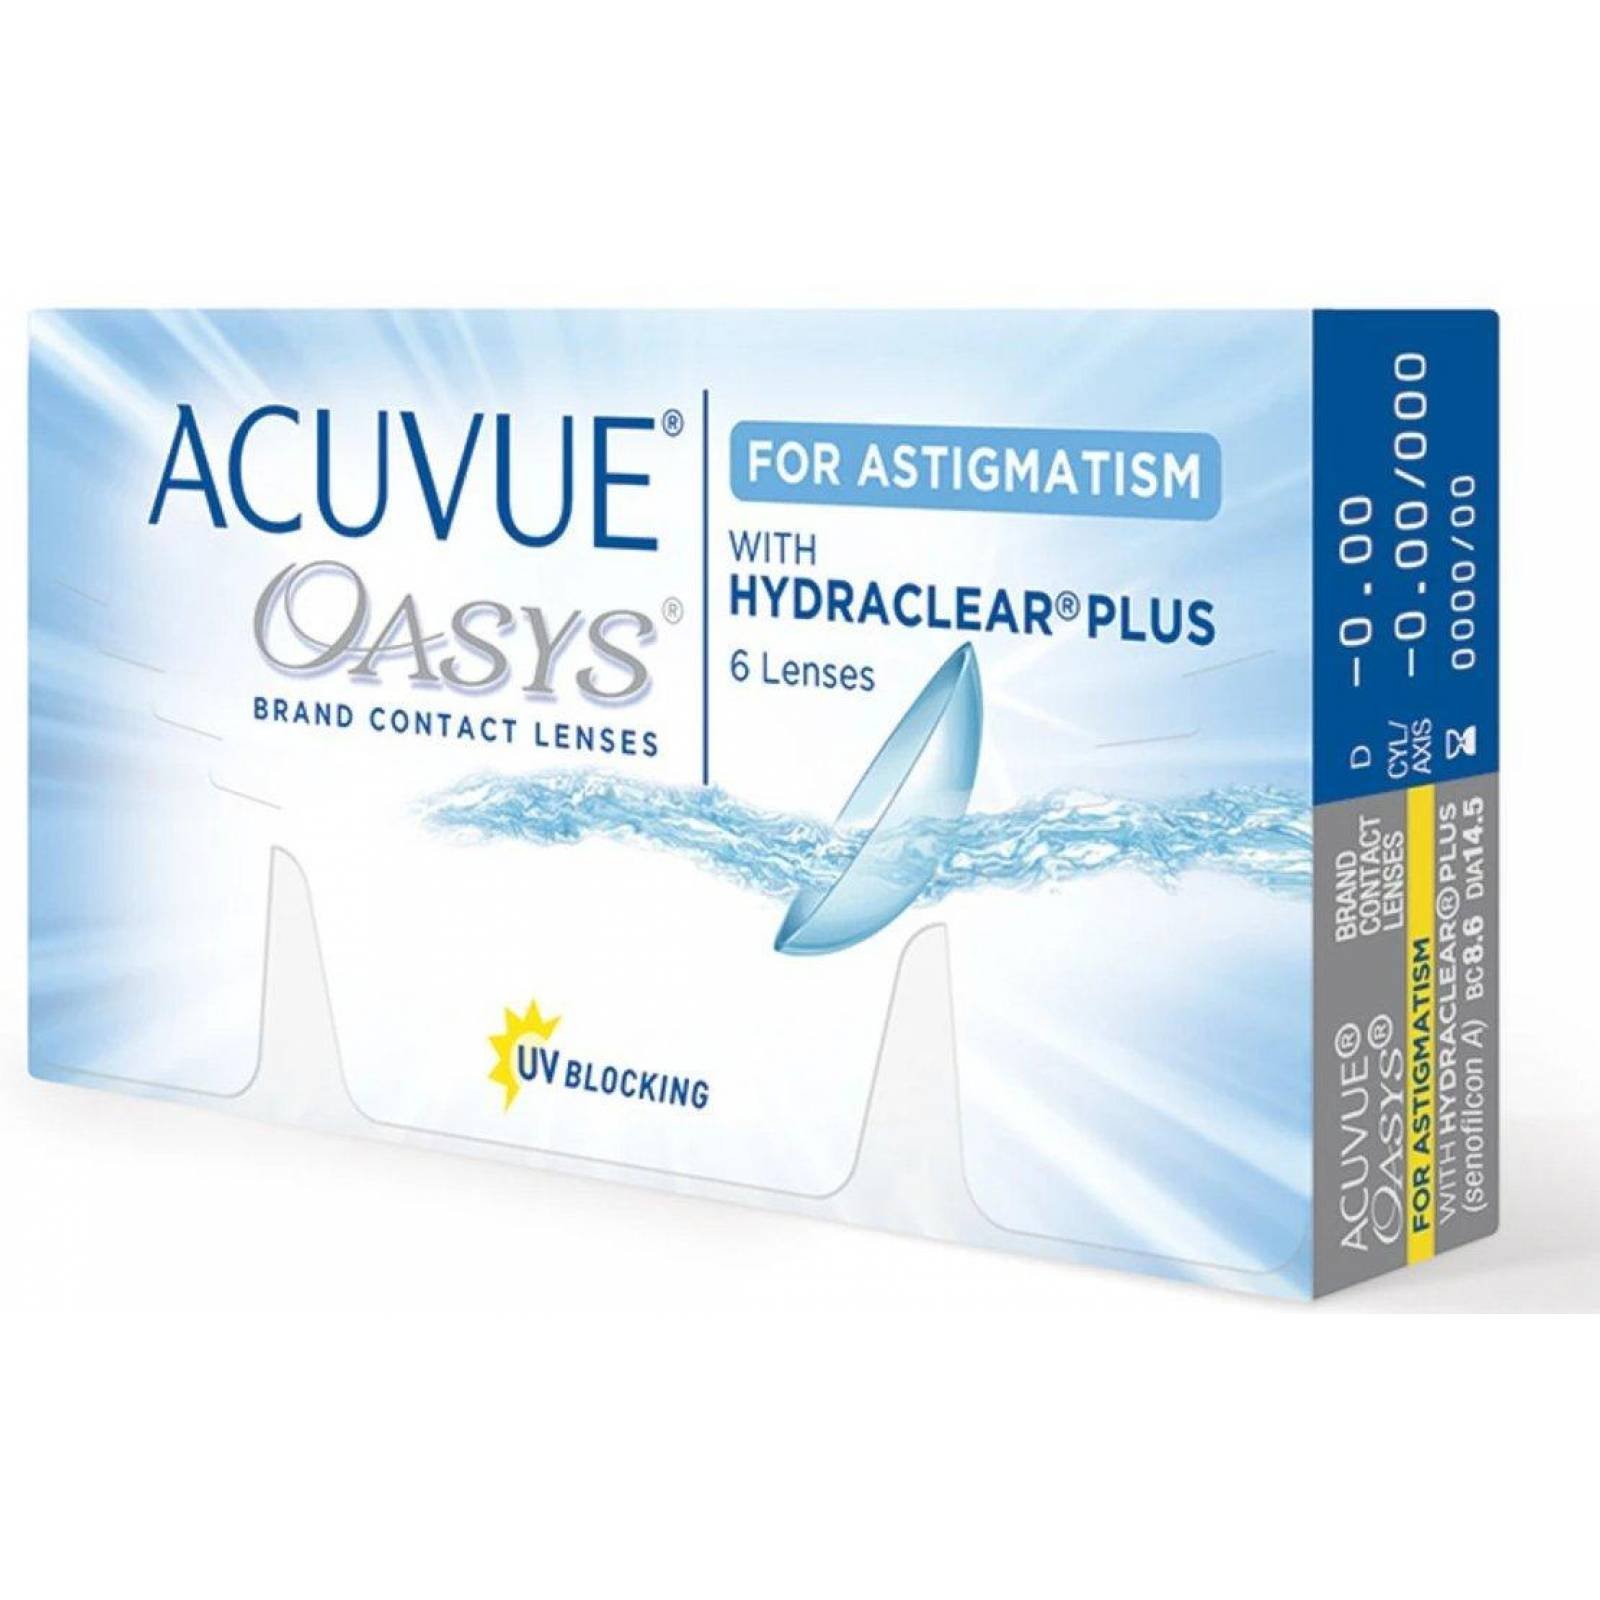 Where To Buy Acuvue Oasys For Astigmatism